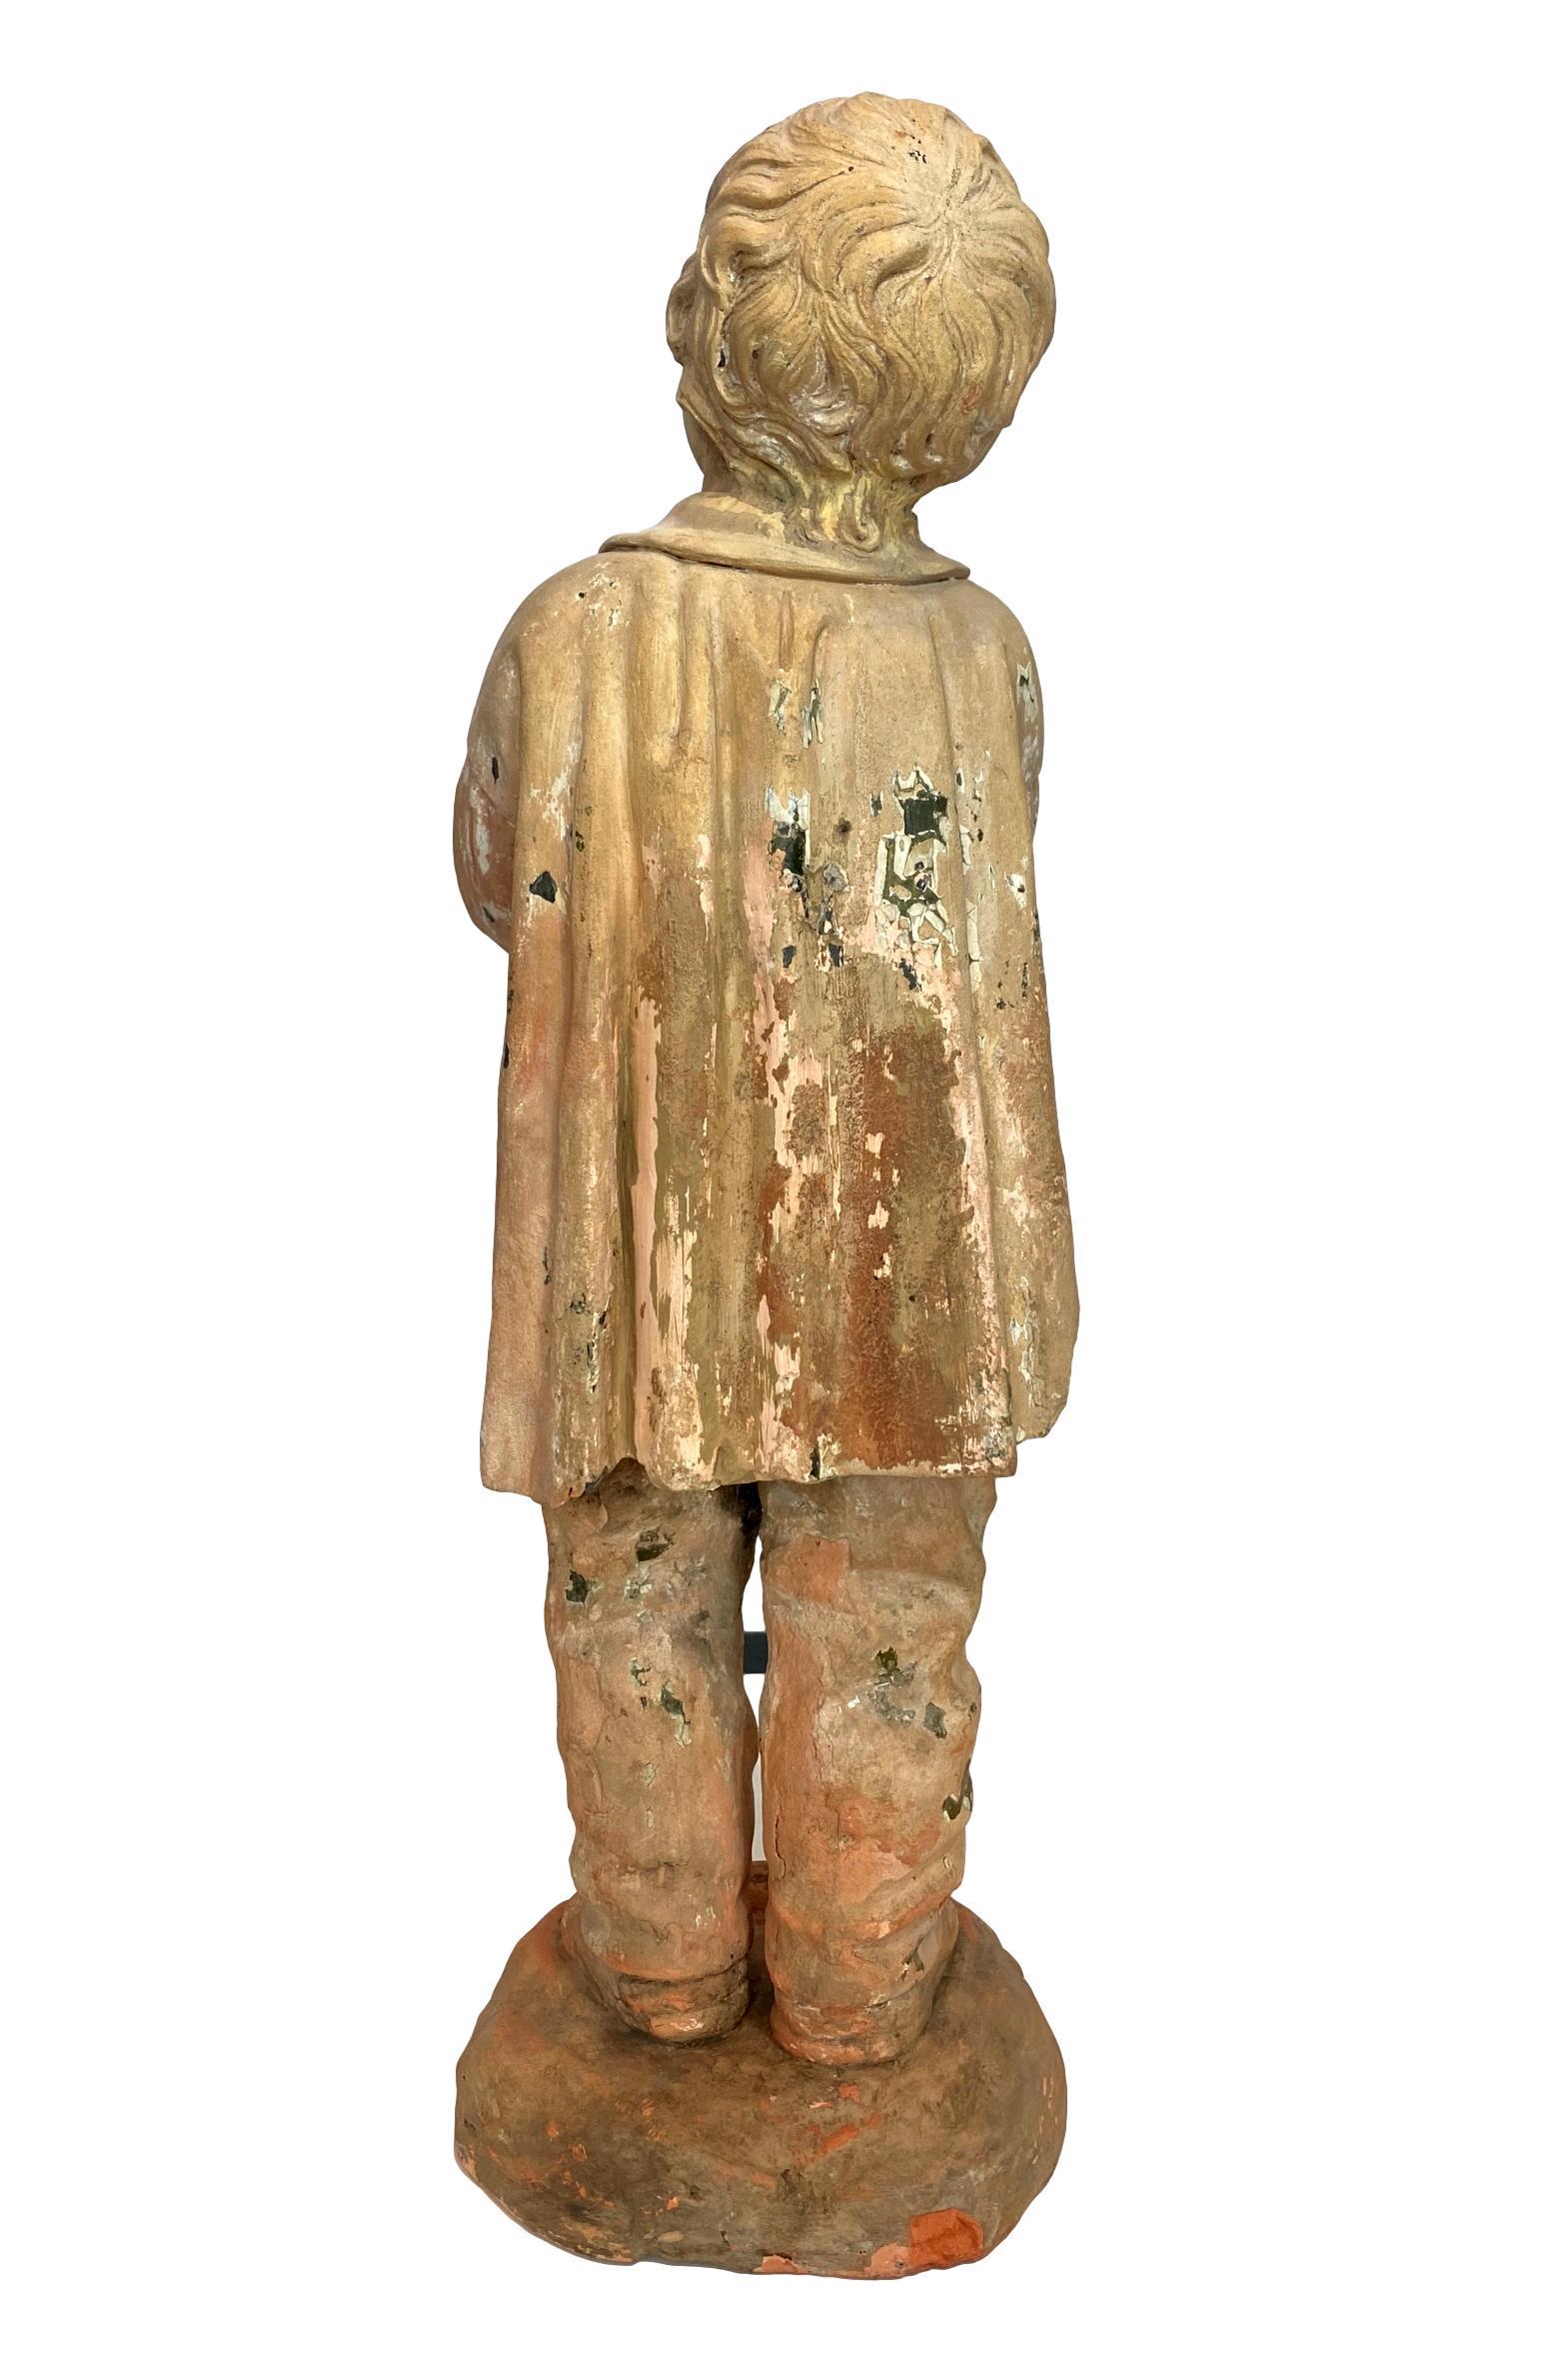 Belle Époque Terra Cotta Figure of a Boy with Hat, French, ca. 1890